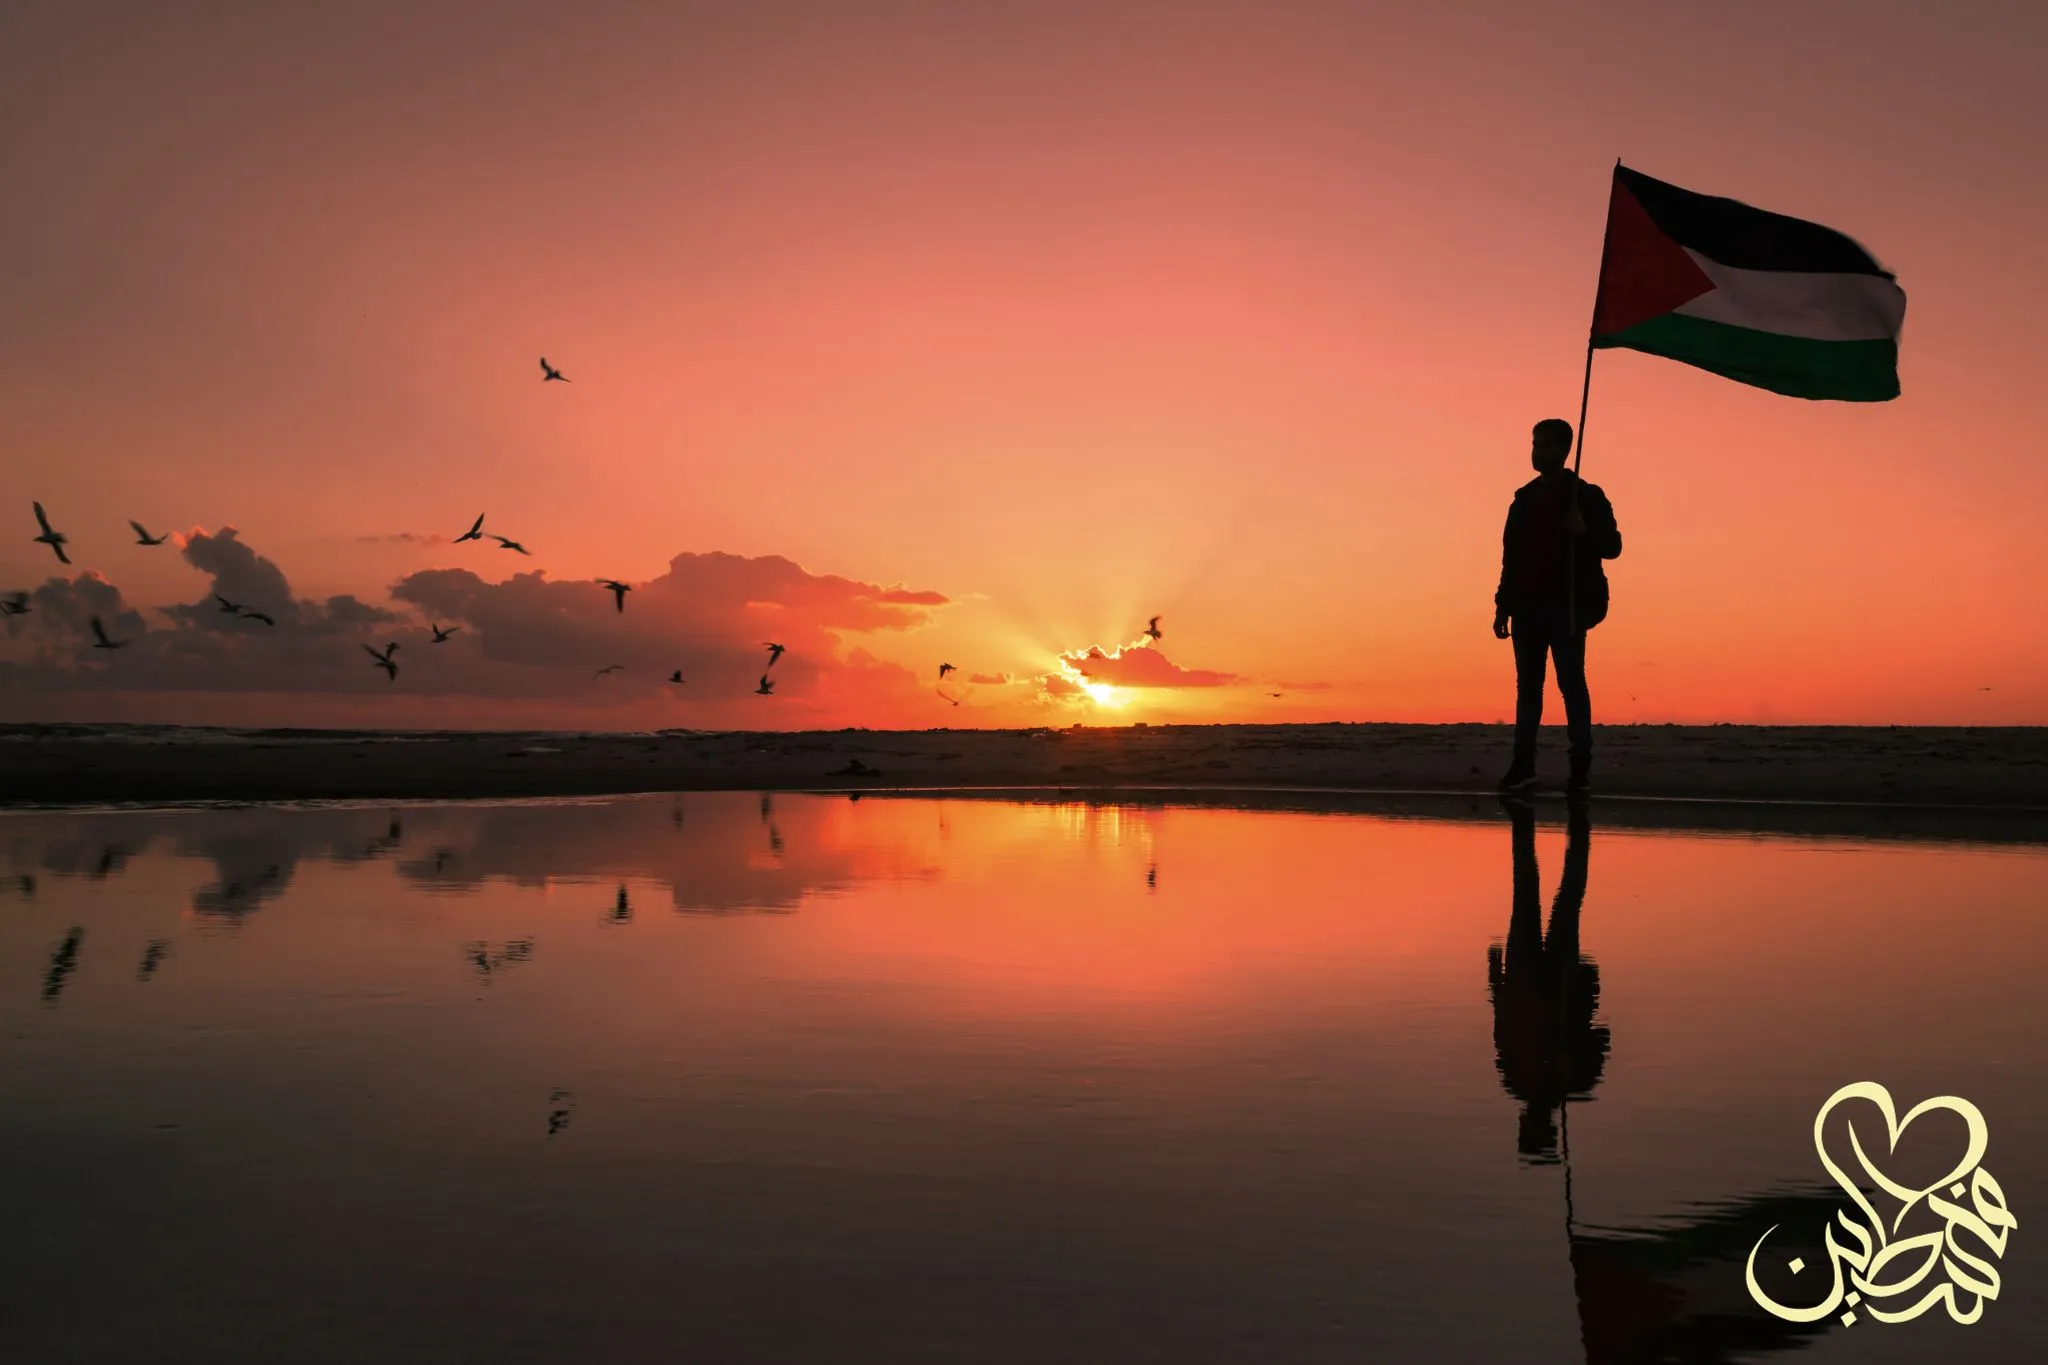 A Silhouette photo of young man holding up Palestine flag near the beach Gaza Palestine (Hazem Swidan Getty Images). Calligraphy Sign by Loy 